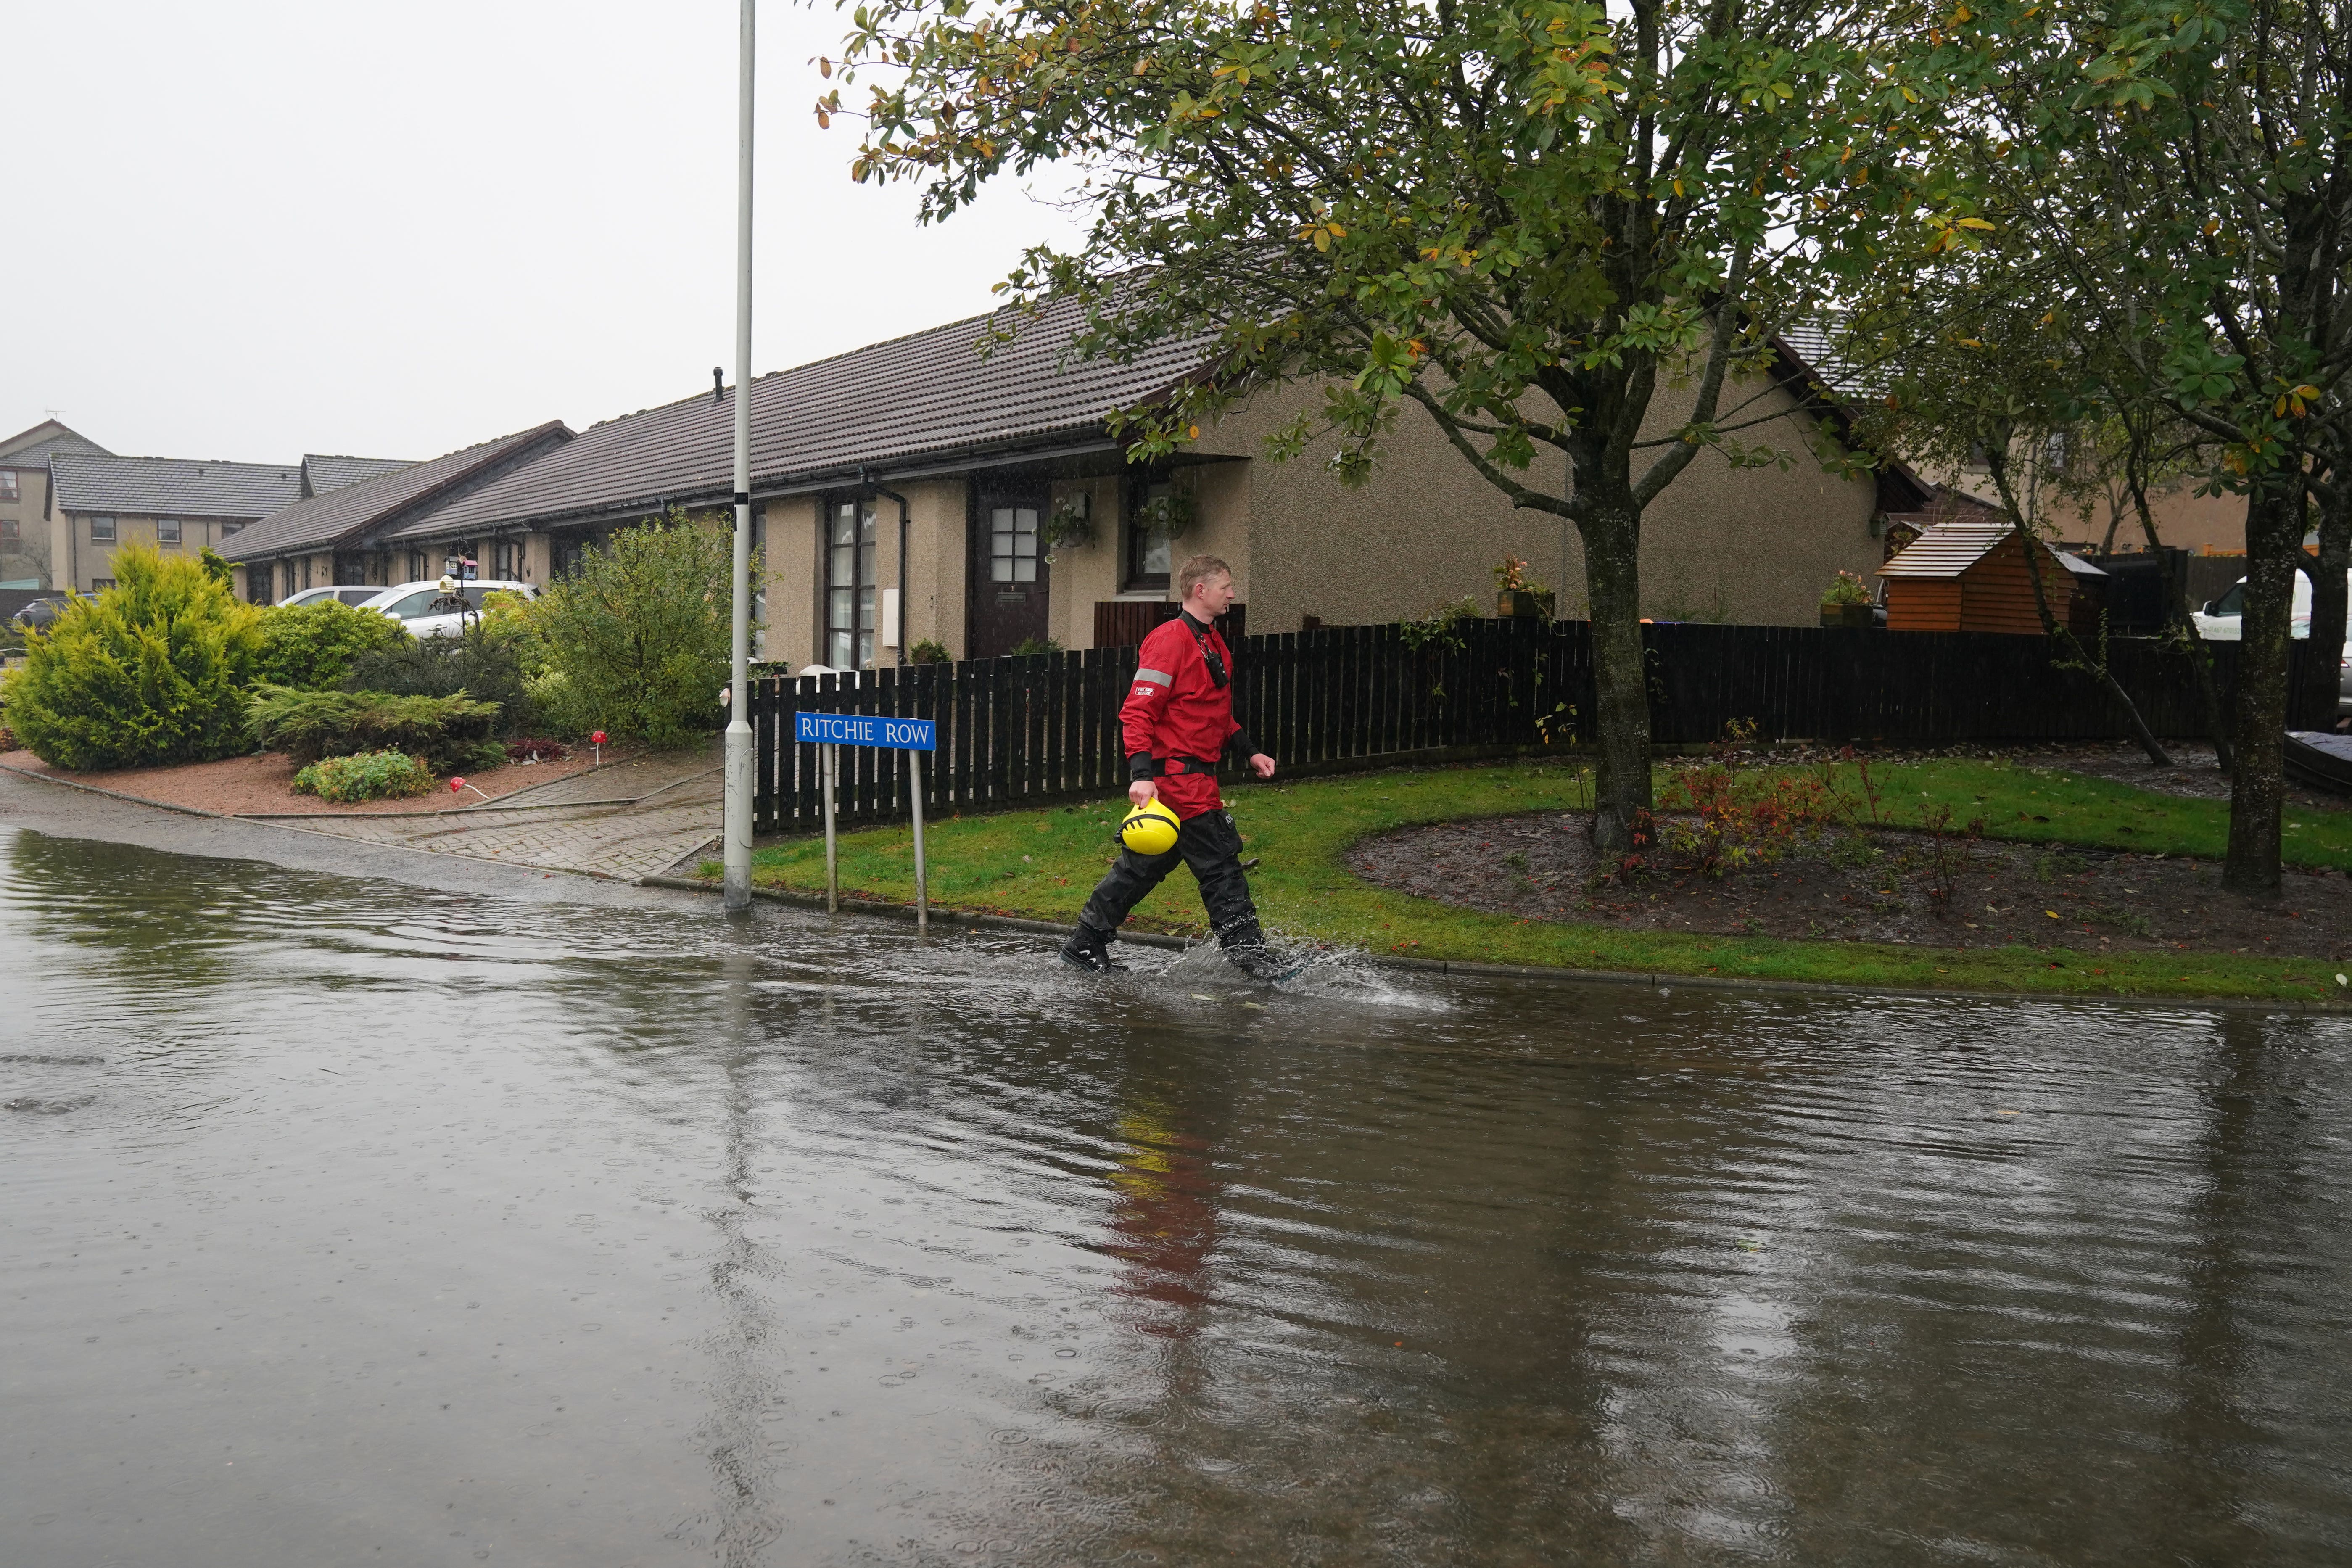 Angus and Aberdeenshire were badly hit by flooding